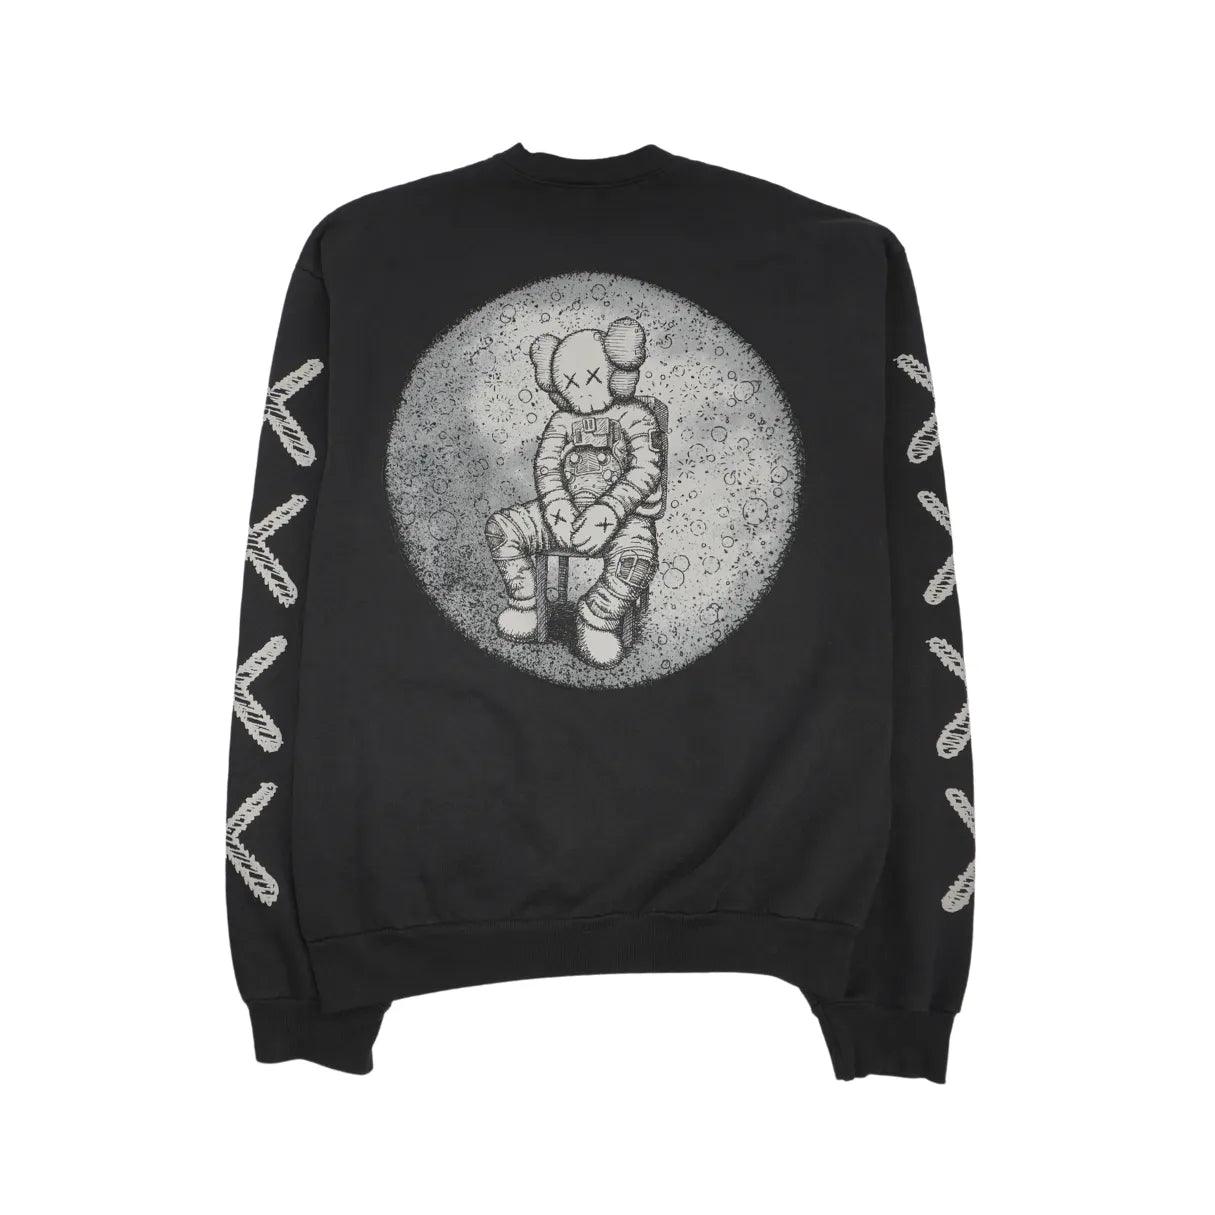 Kaws Pullover Sweater - Men's L - Fashionably Yours